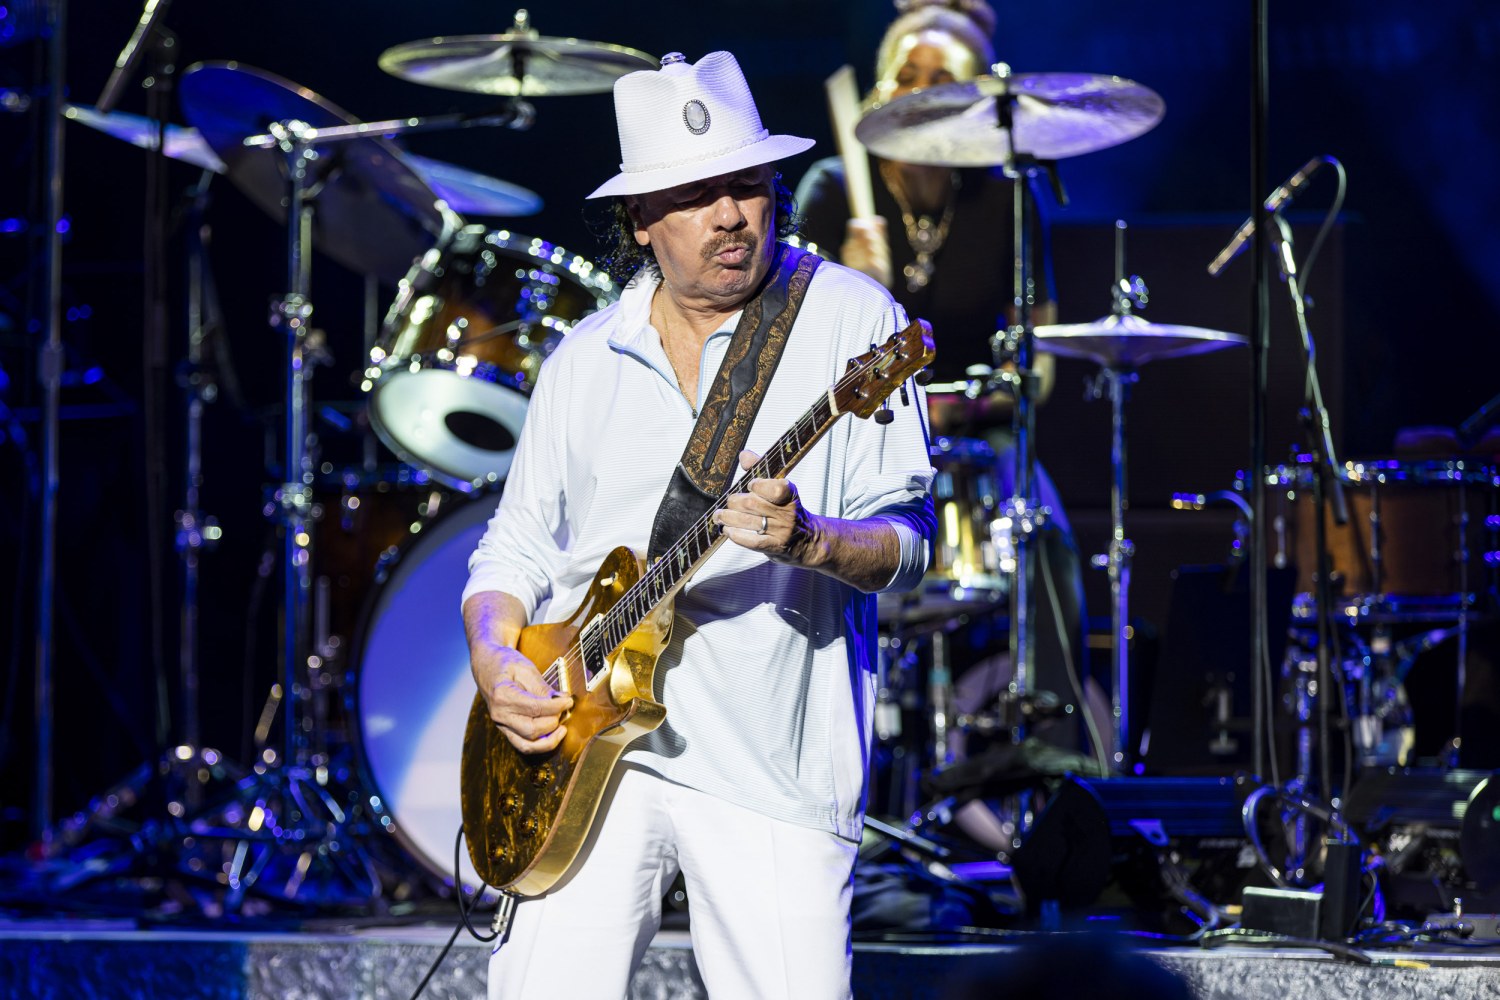 Rock icon Carlos Santana postpones six tour dates after collapsing on stage